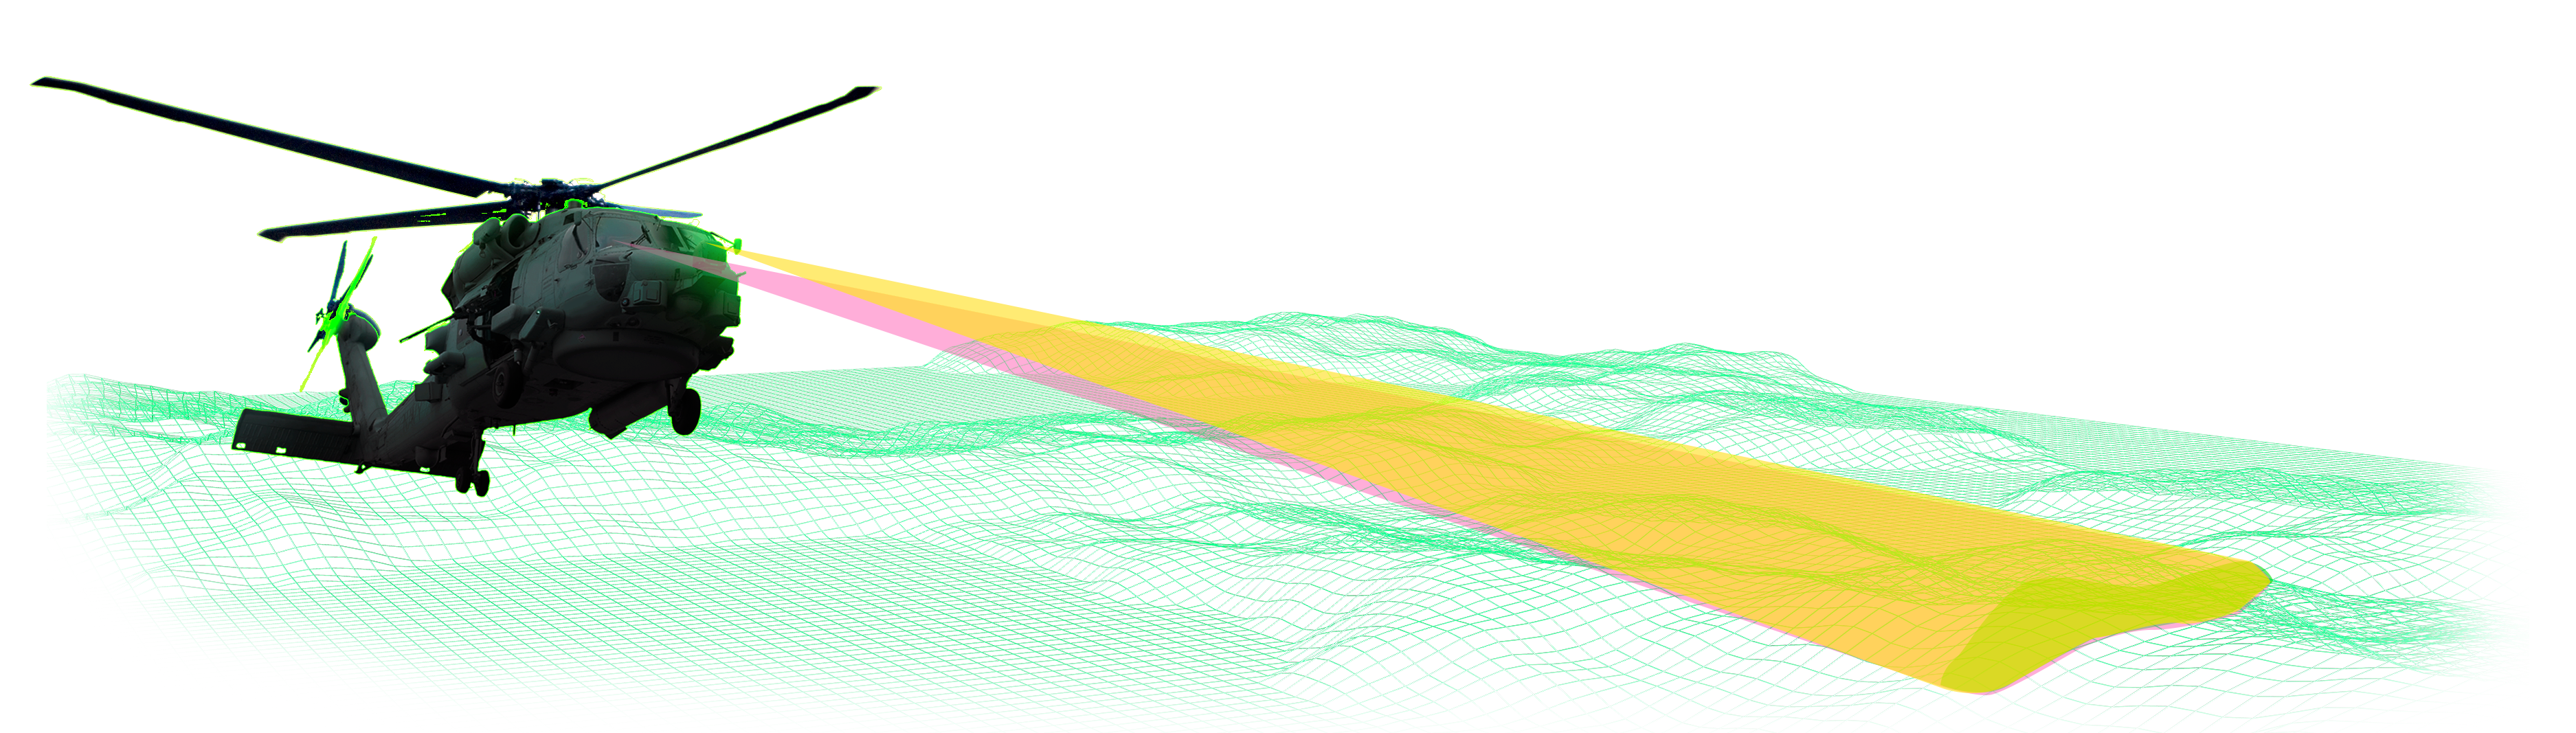 LineofSite-MH60R